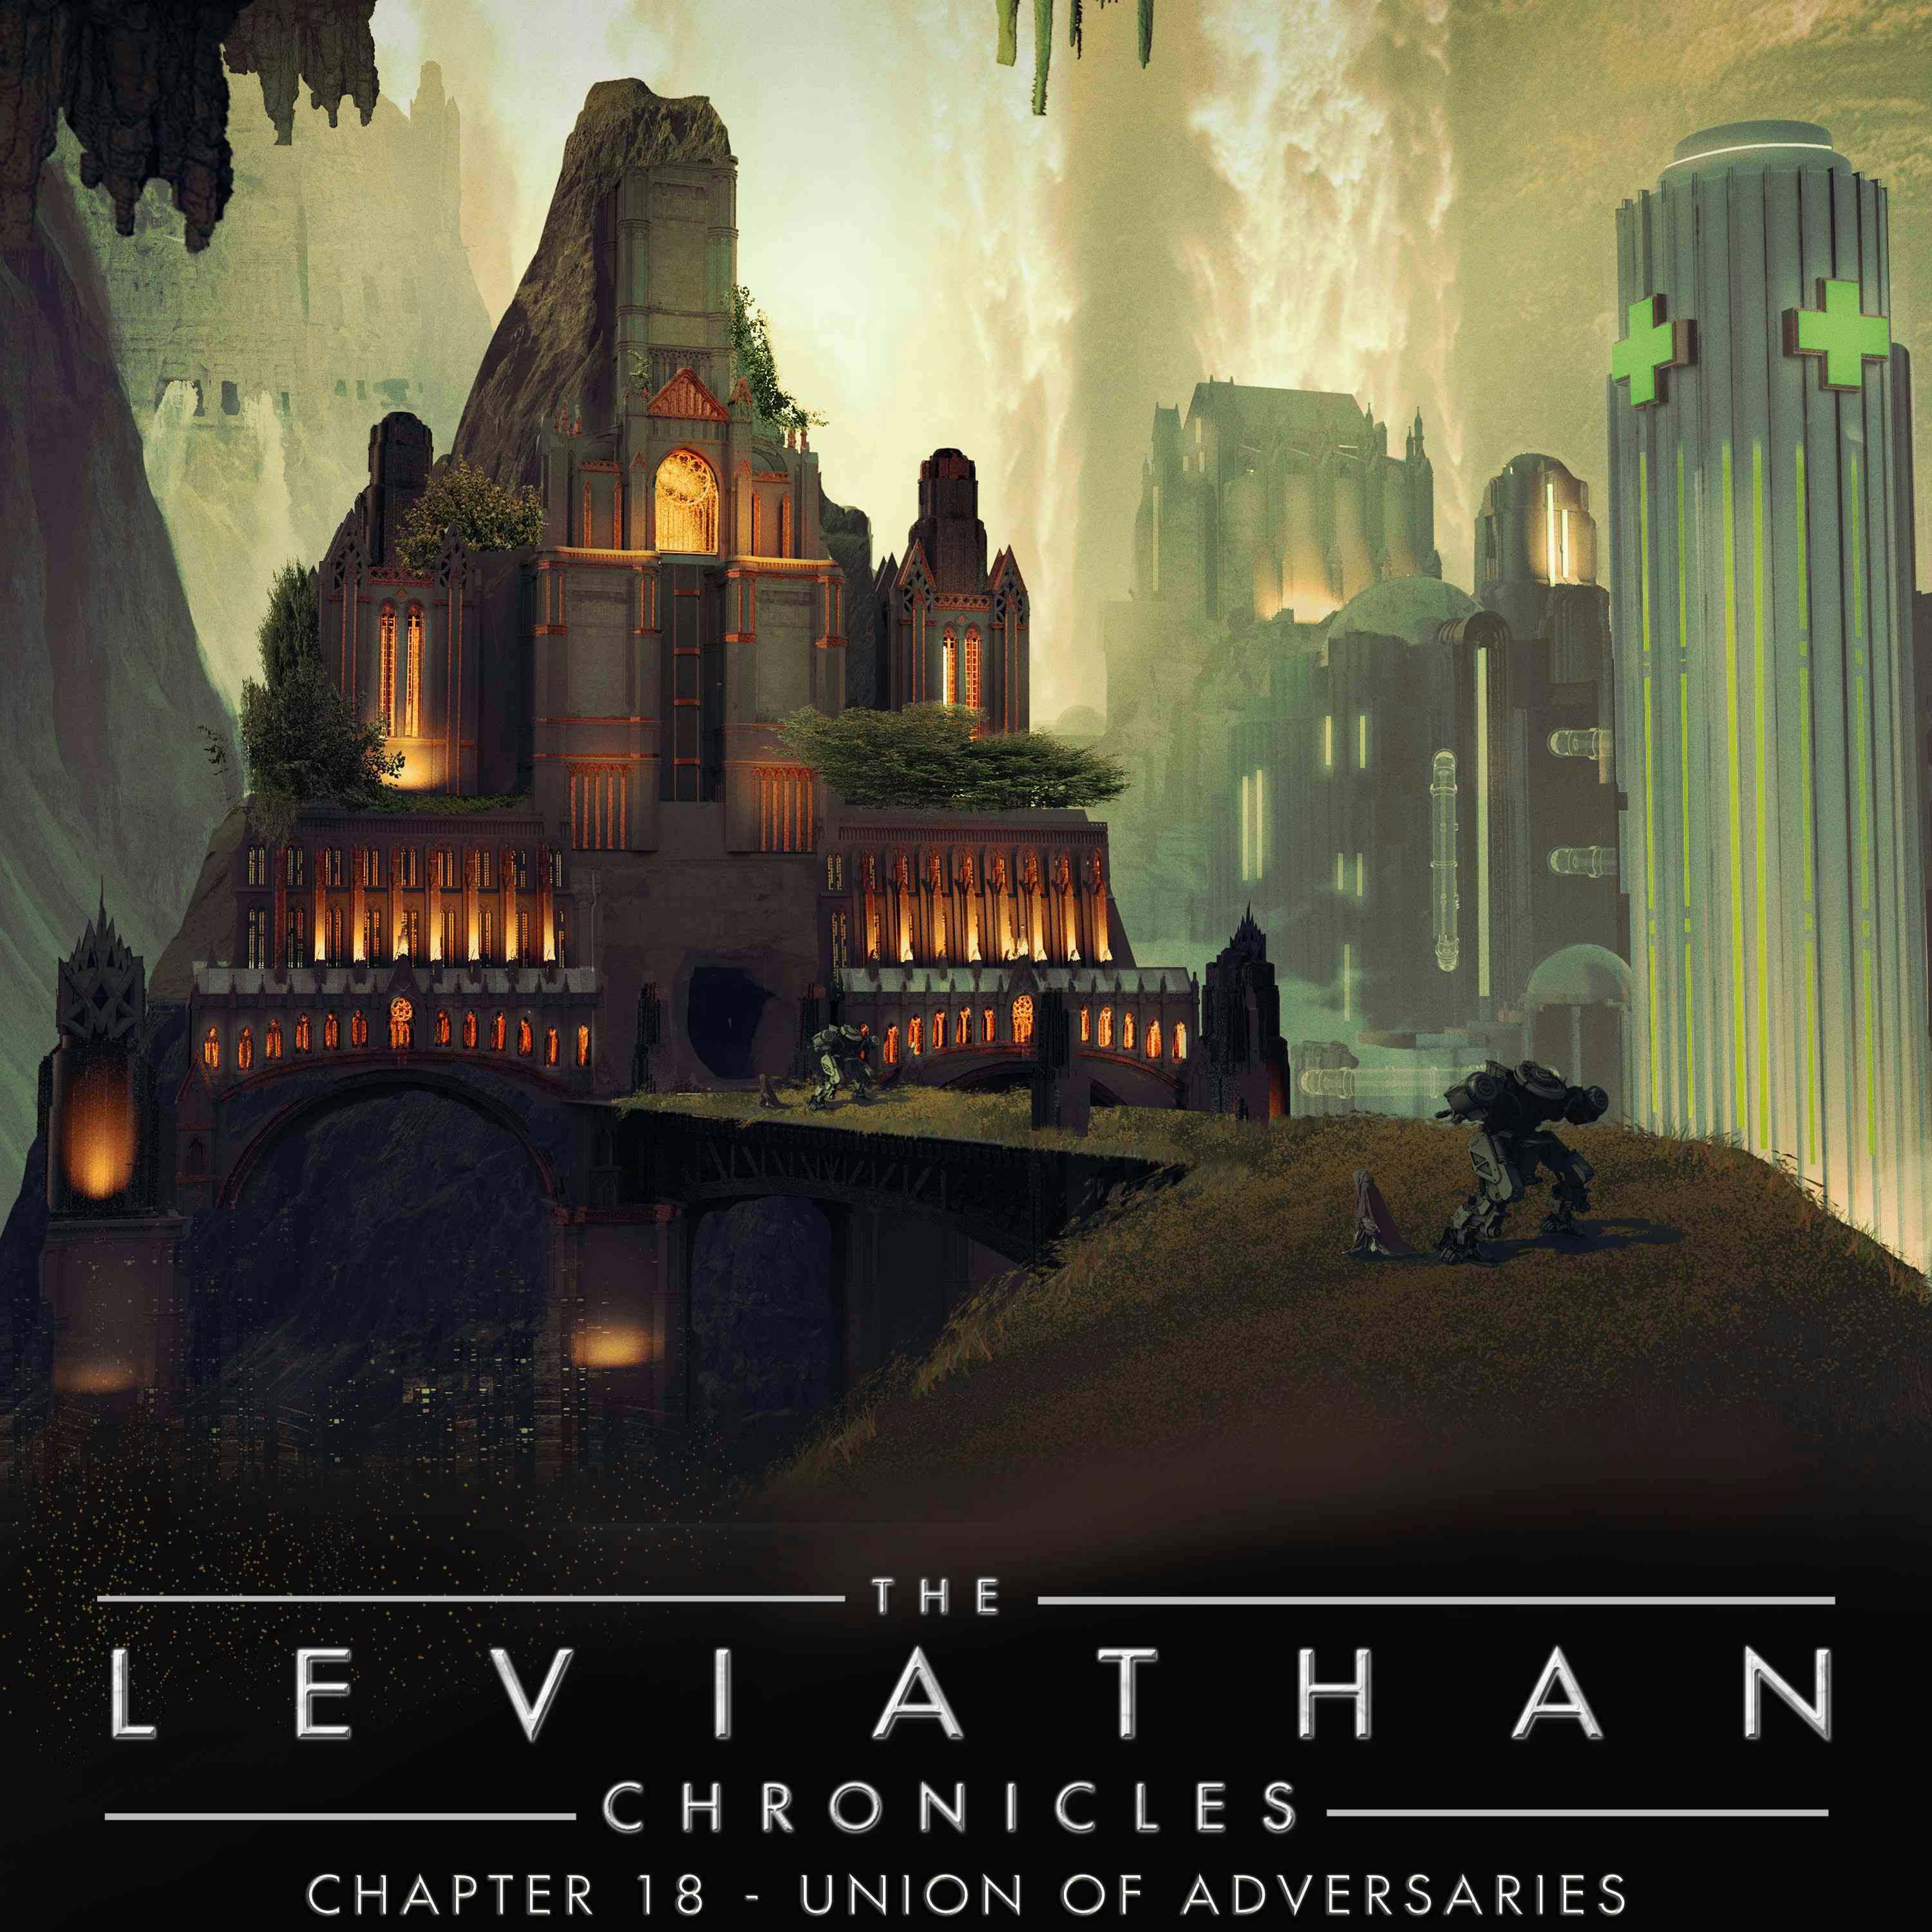 The Leviathan Chronicles | Chapter 18 - Union of Adversaries